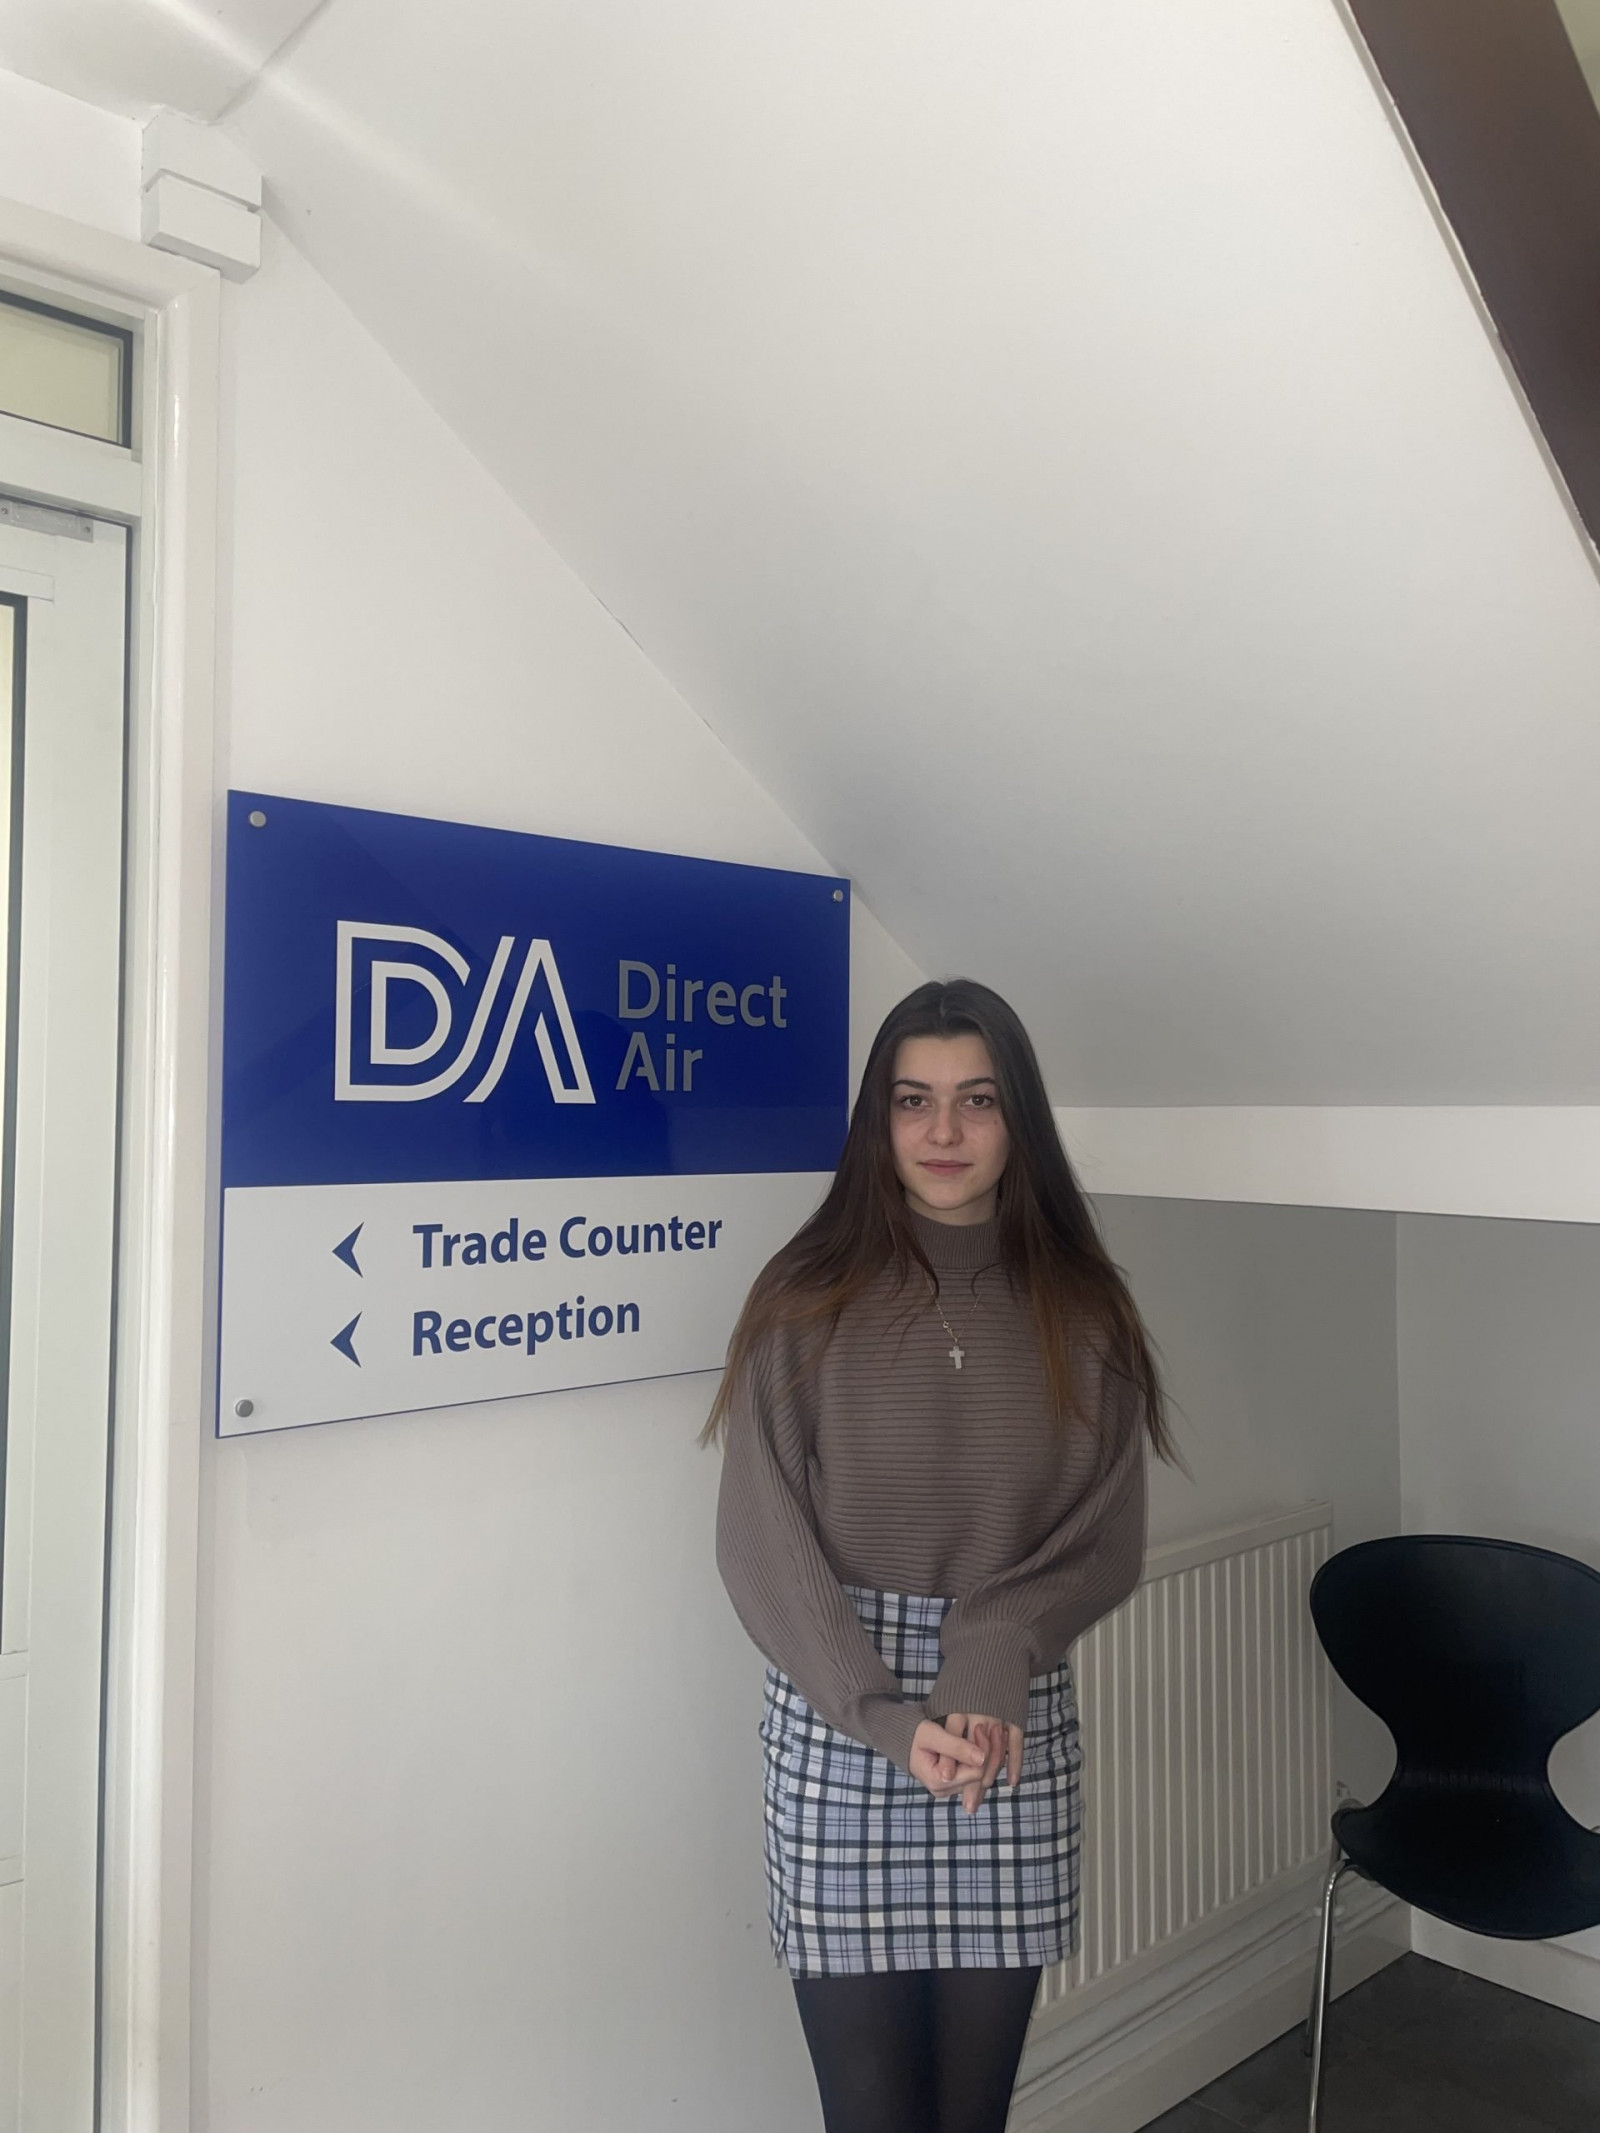 Direct Air’s newest apprentice progresses in the Service Support team